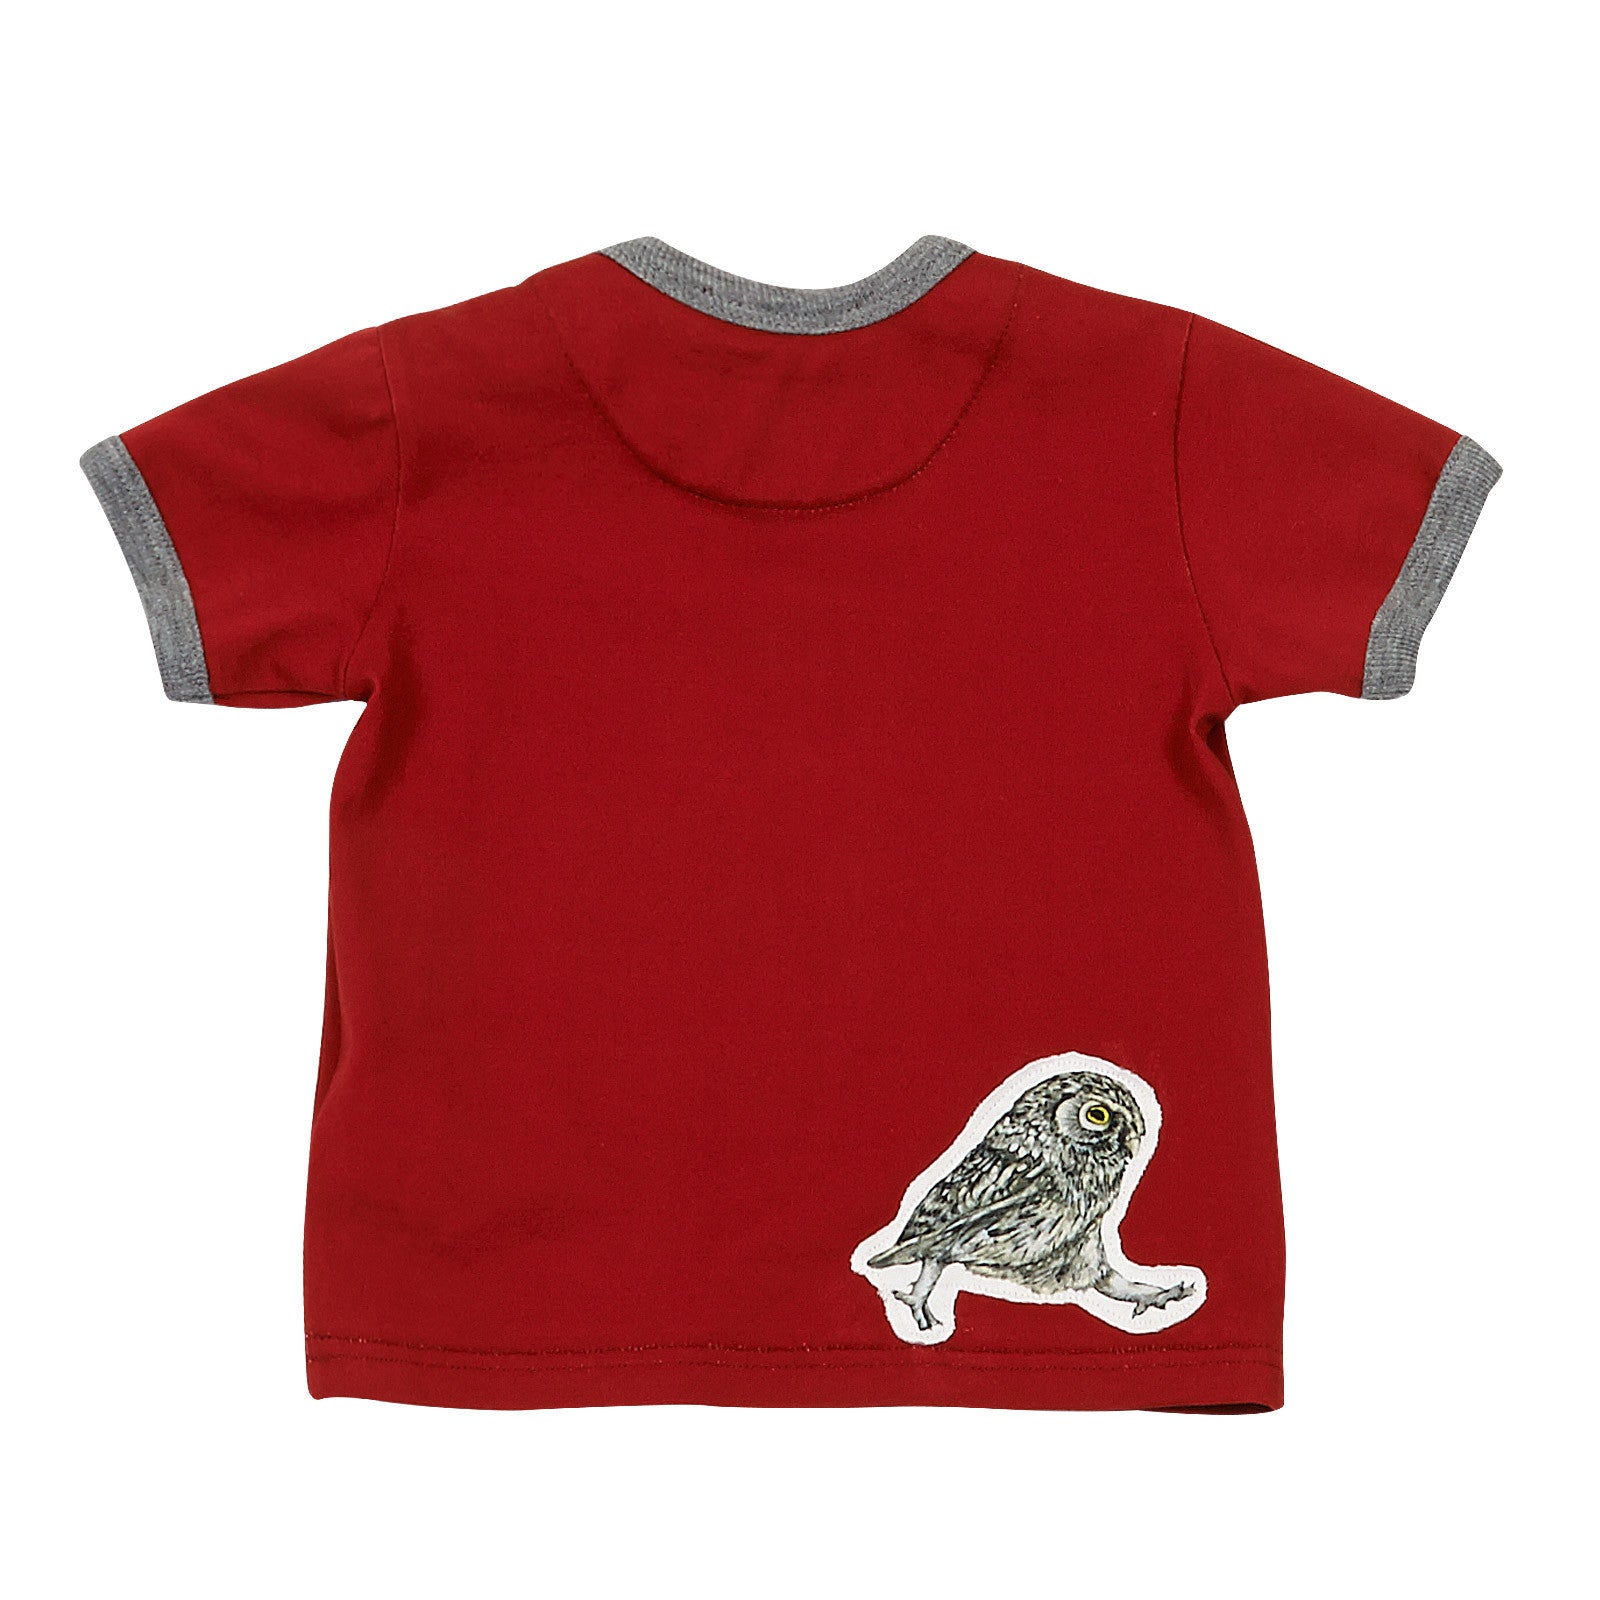 Baby Boys Red Owls Printed Cotton T-Shirt With Grey Cuffs - CÉMAROSE | Children's Fashion Store - 2